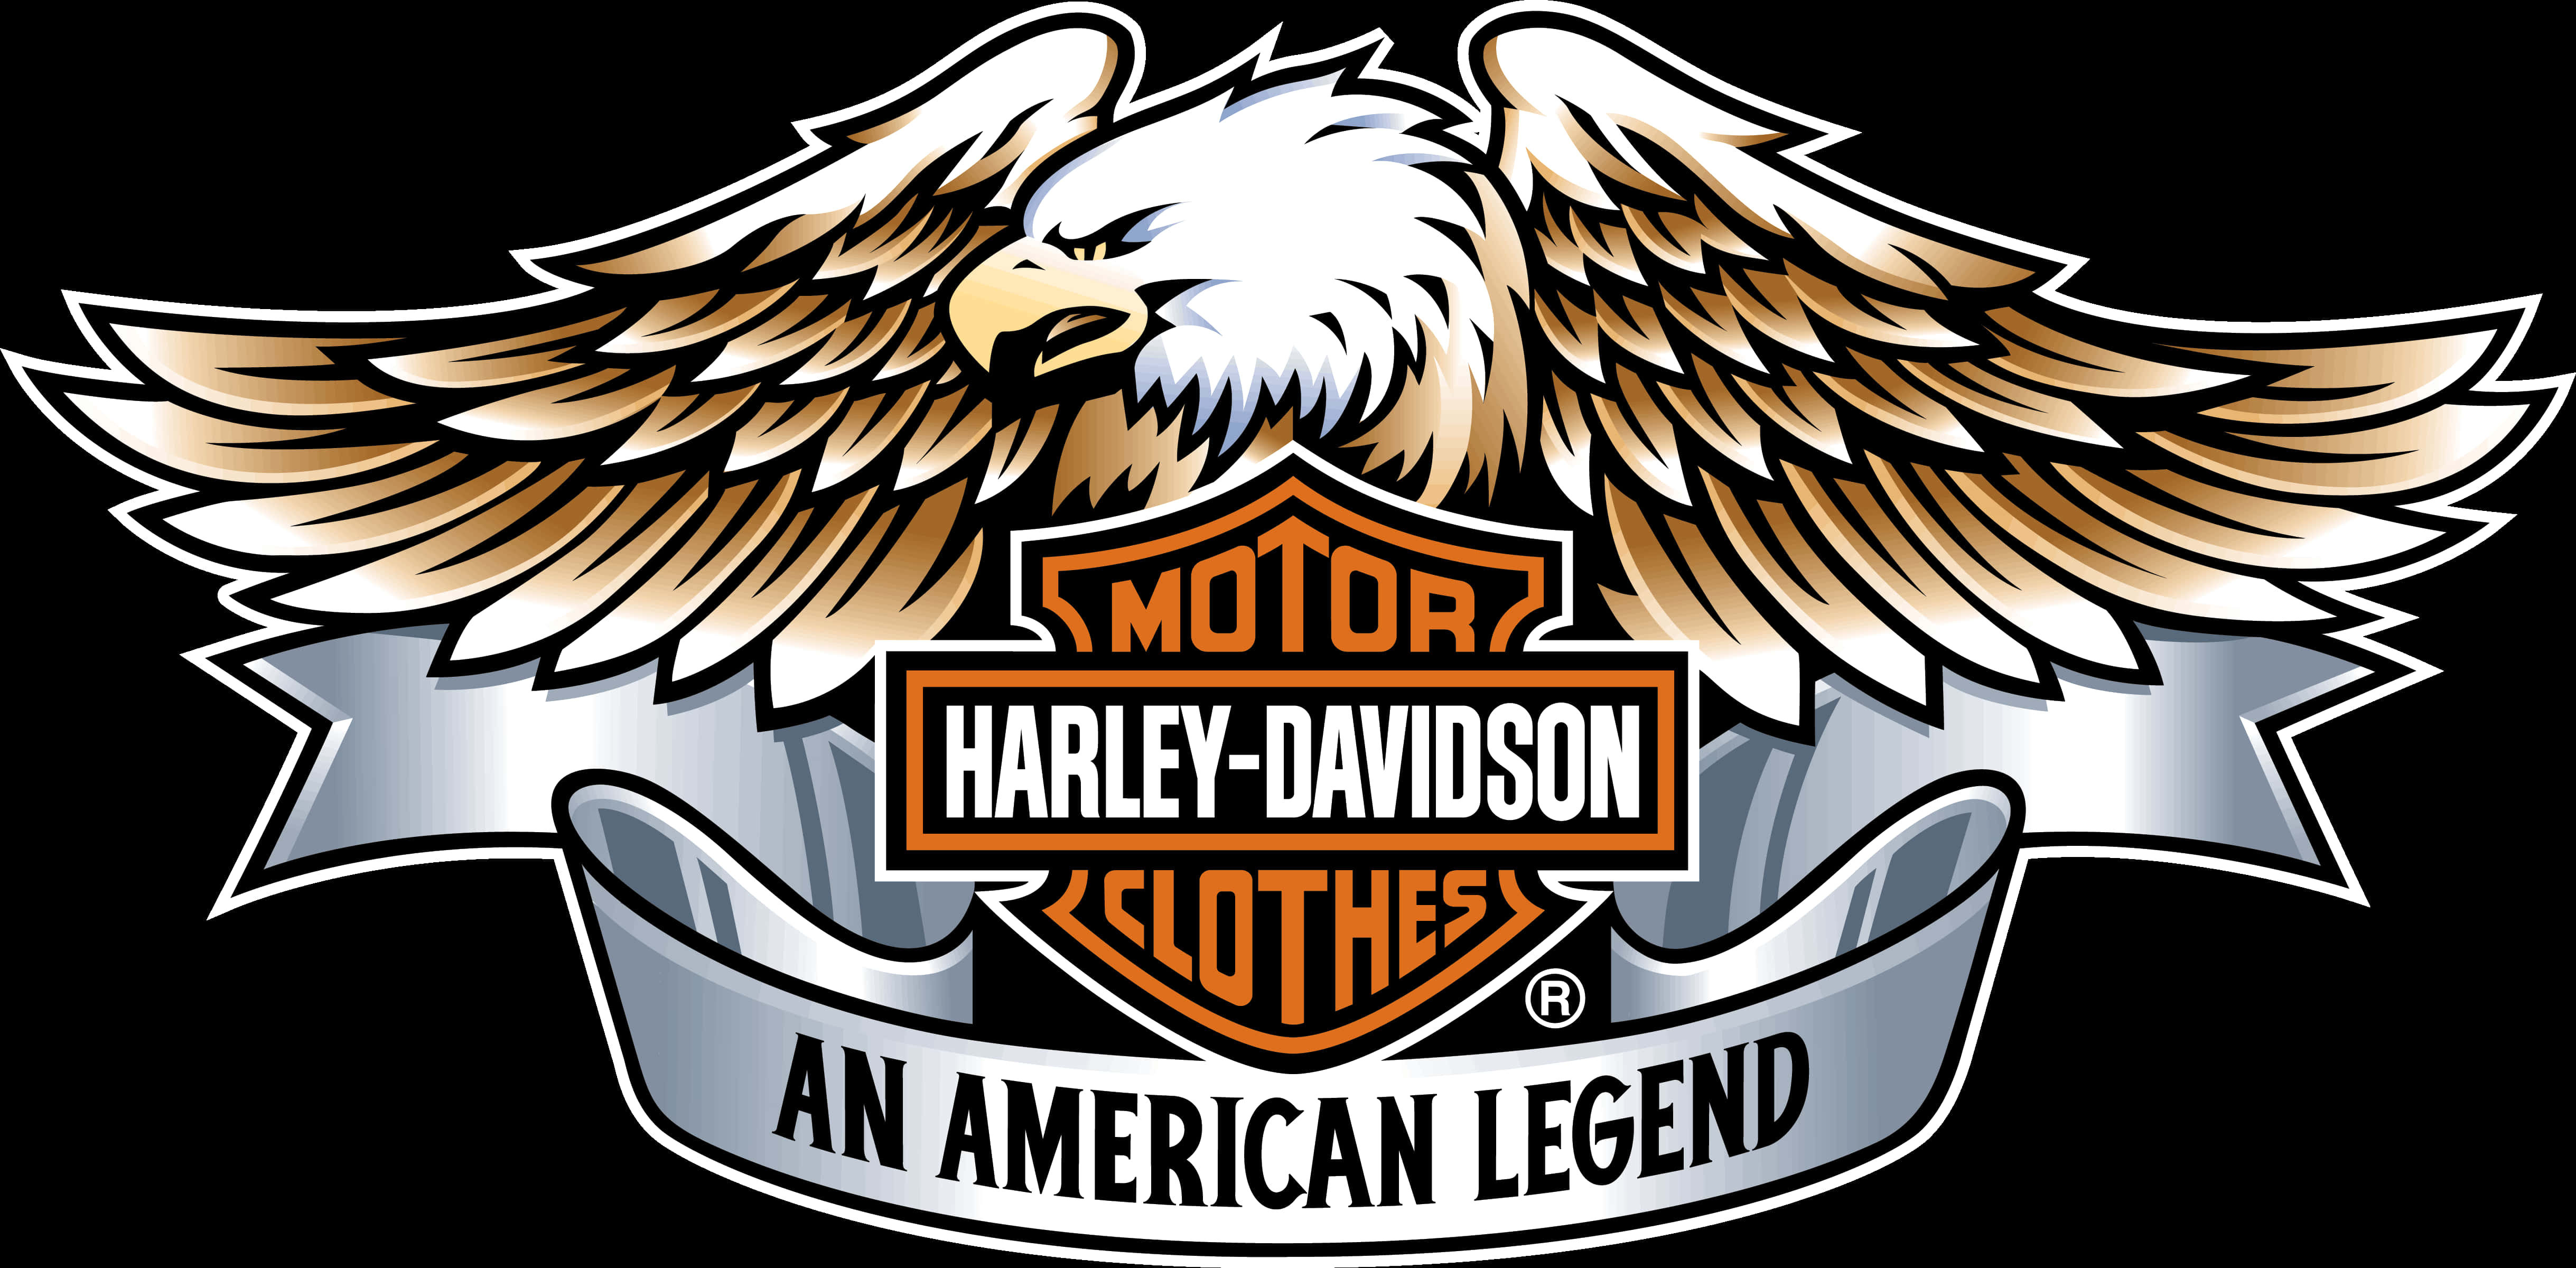 A Logo Of A Motorcycle Brand